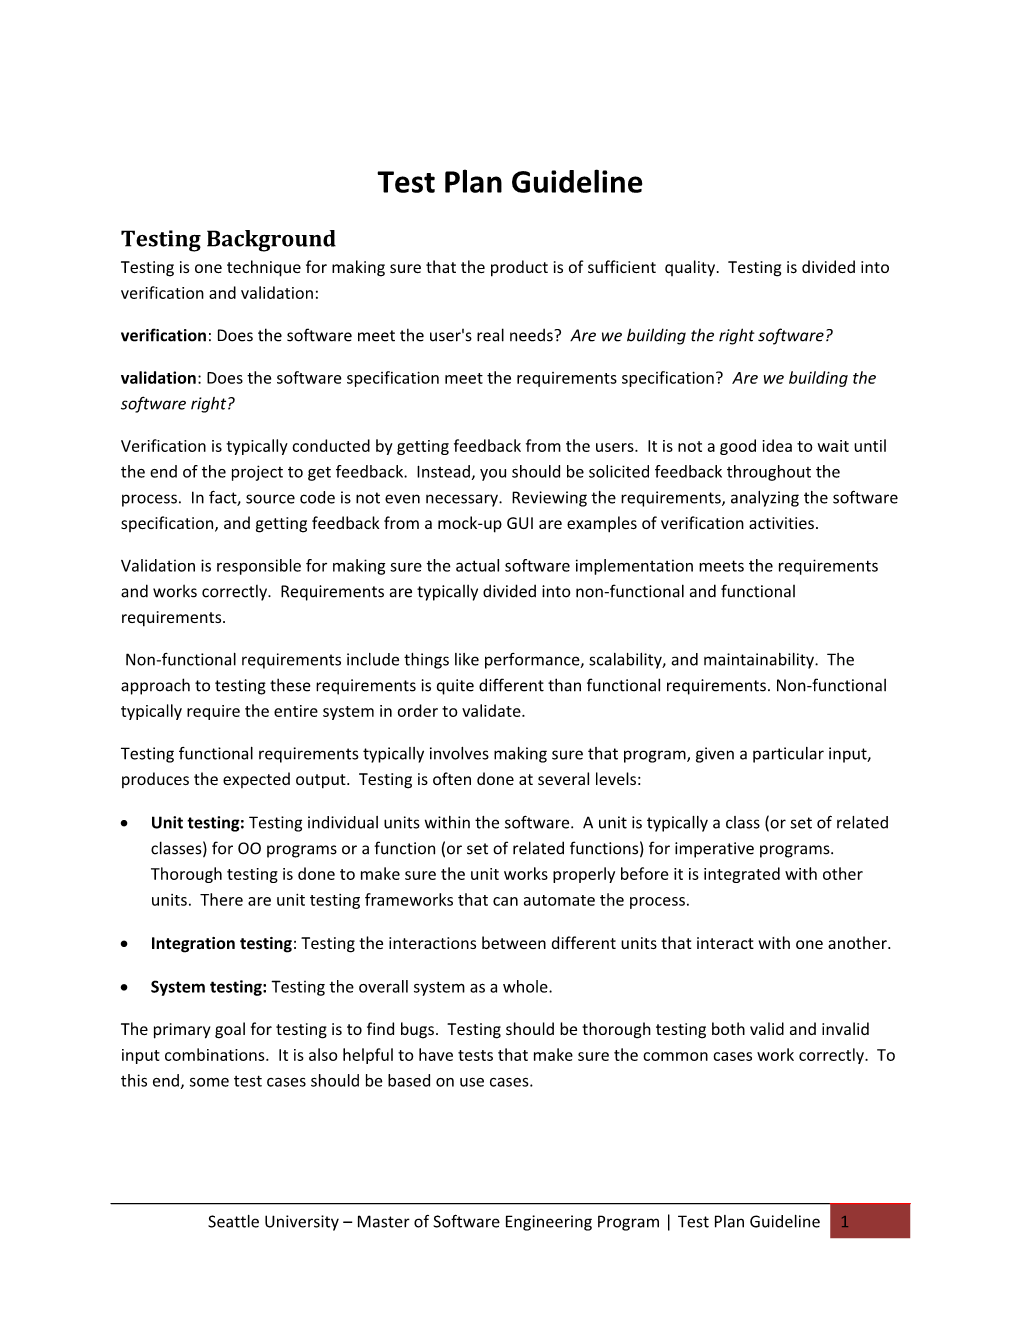 Test Plan Guidelines